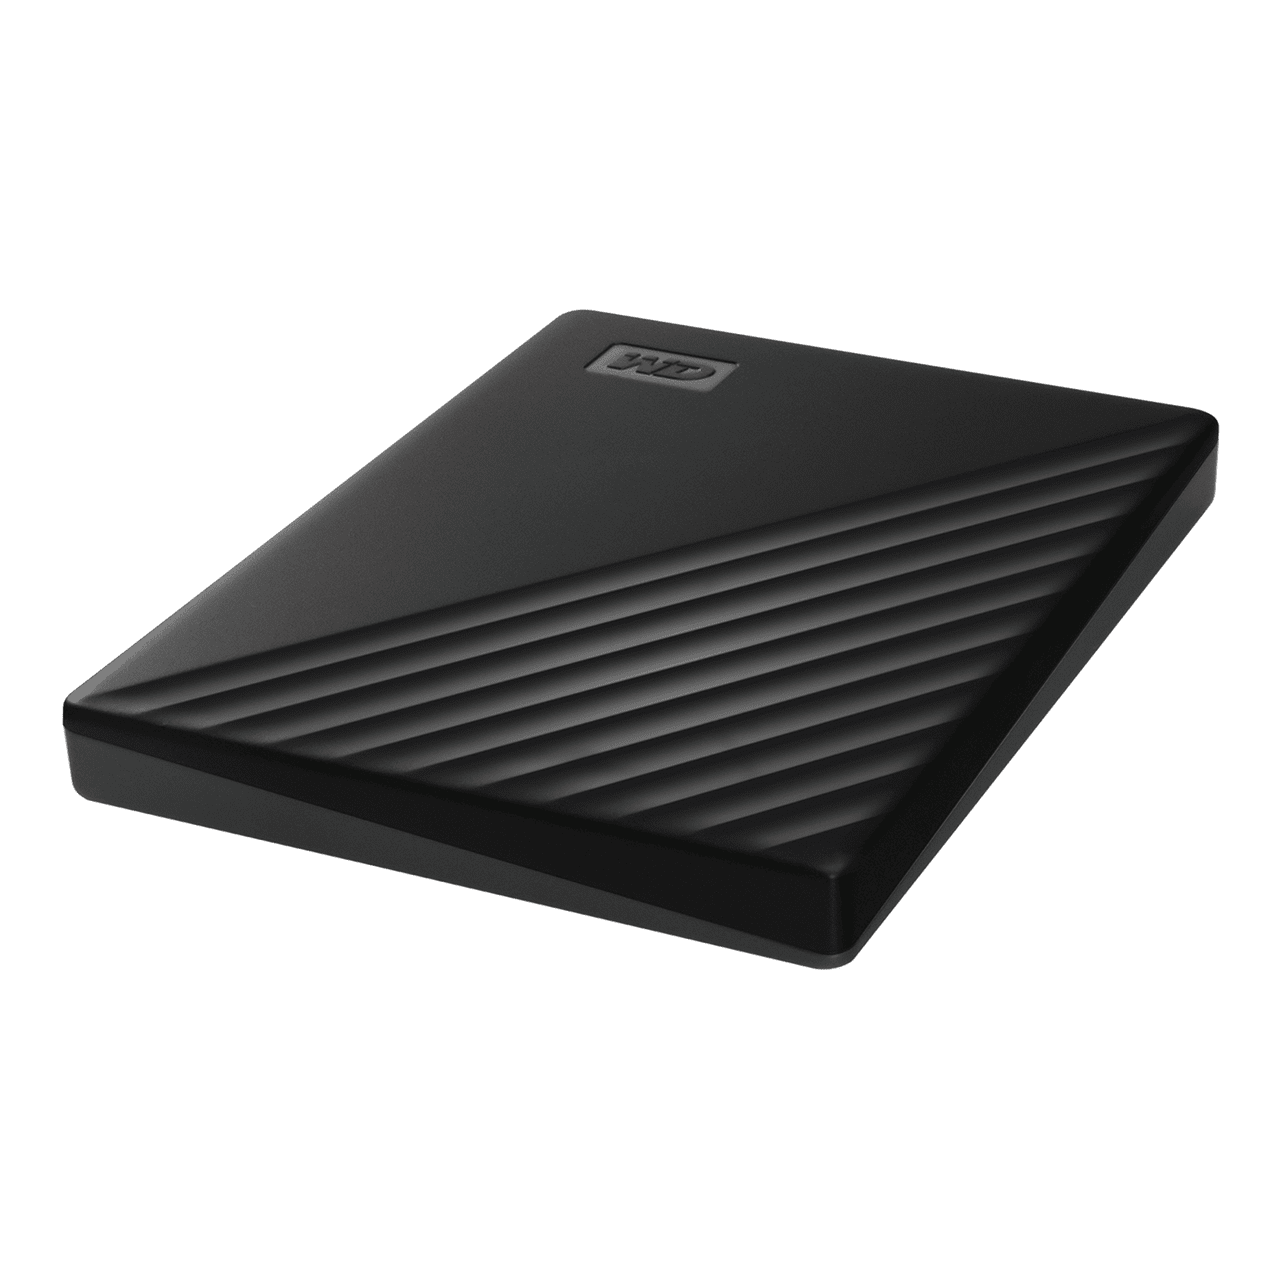 WD Western Digital My Passport 4TB (Black) Slim Portable External Hard Disk USB 3.0 With WD Backup Software & Password Protection